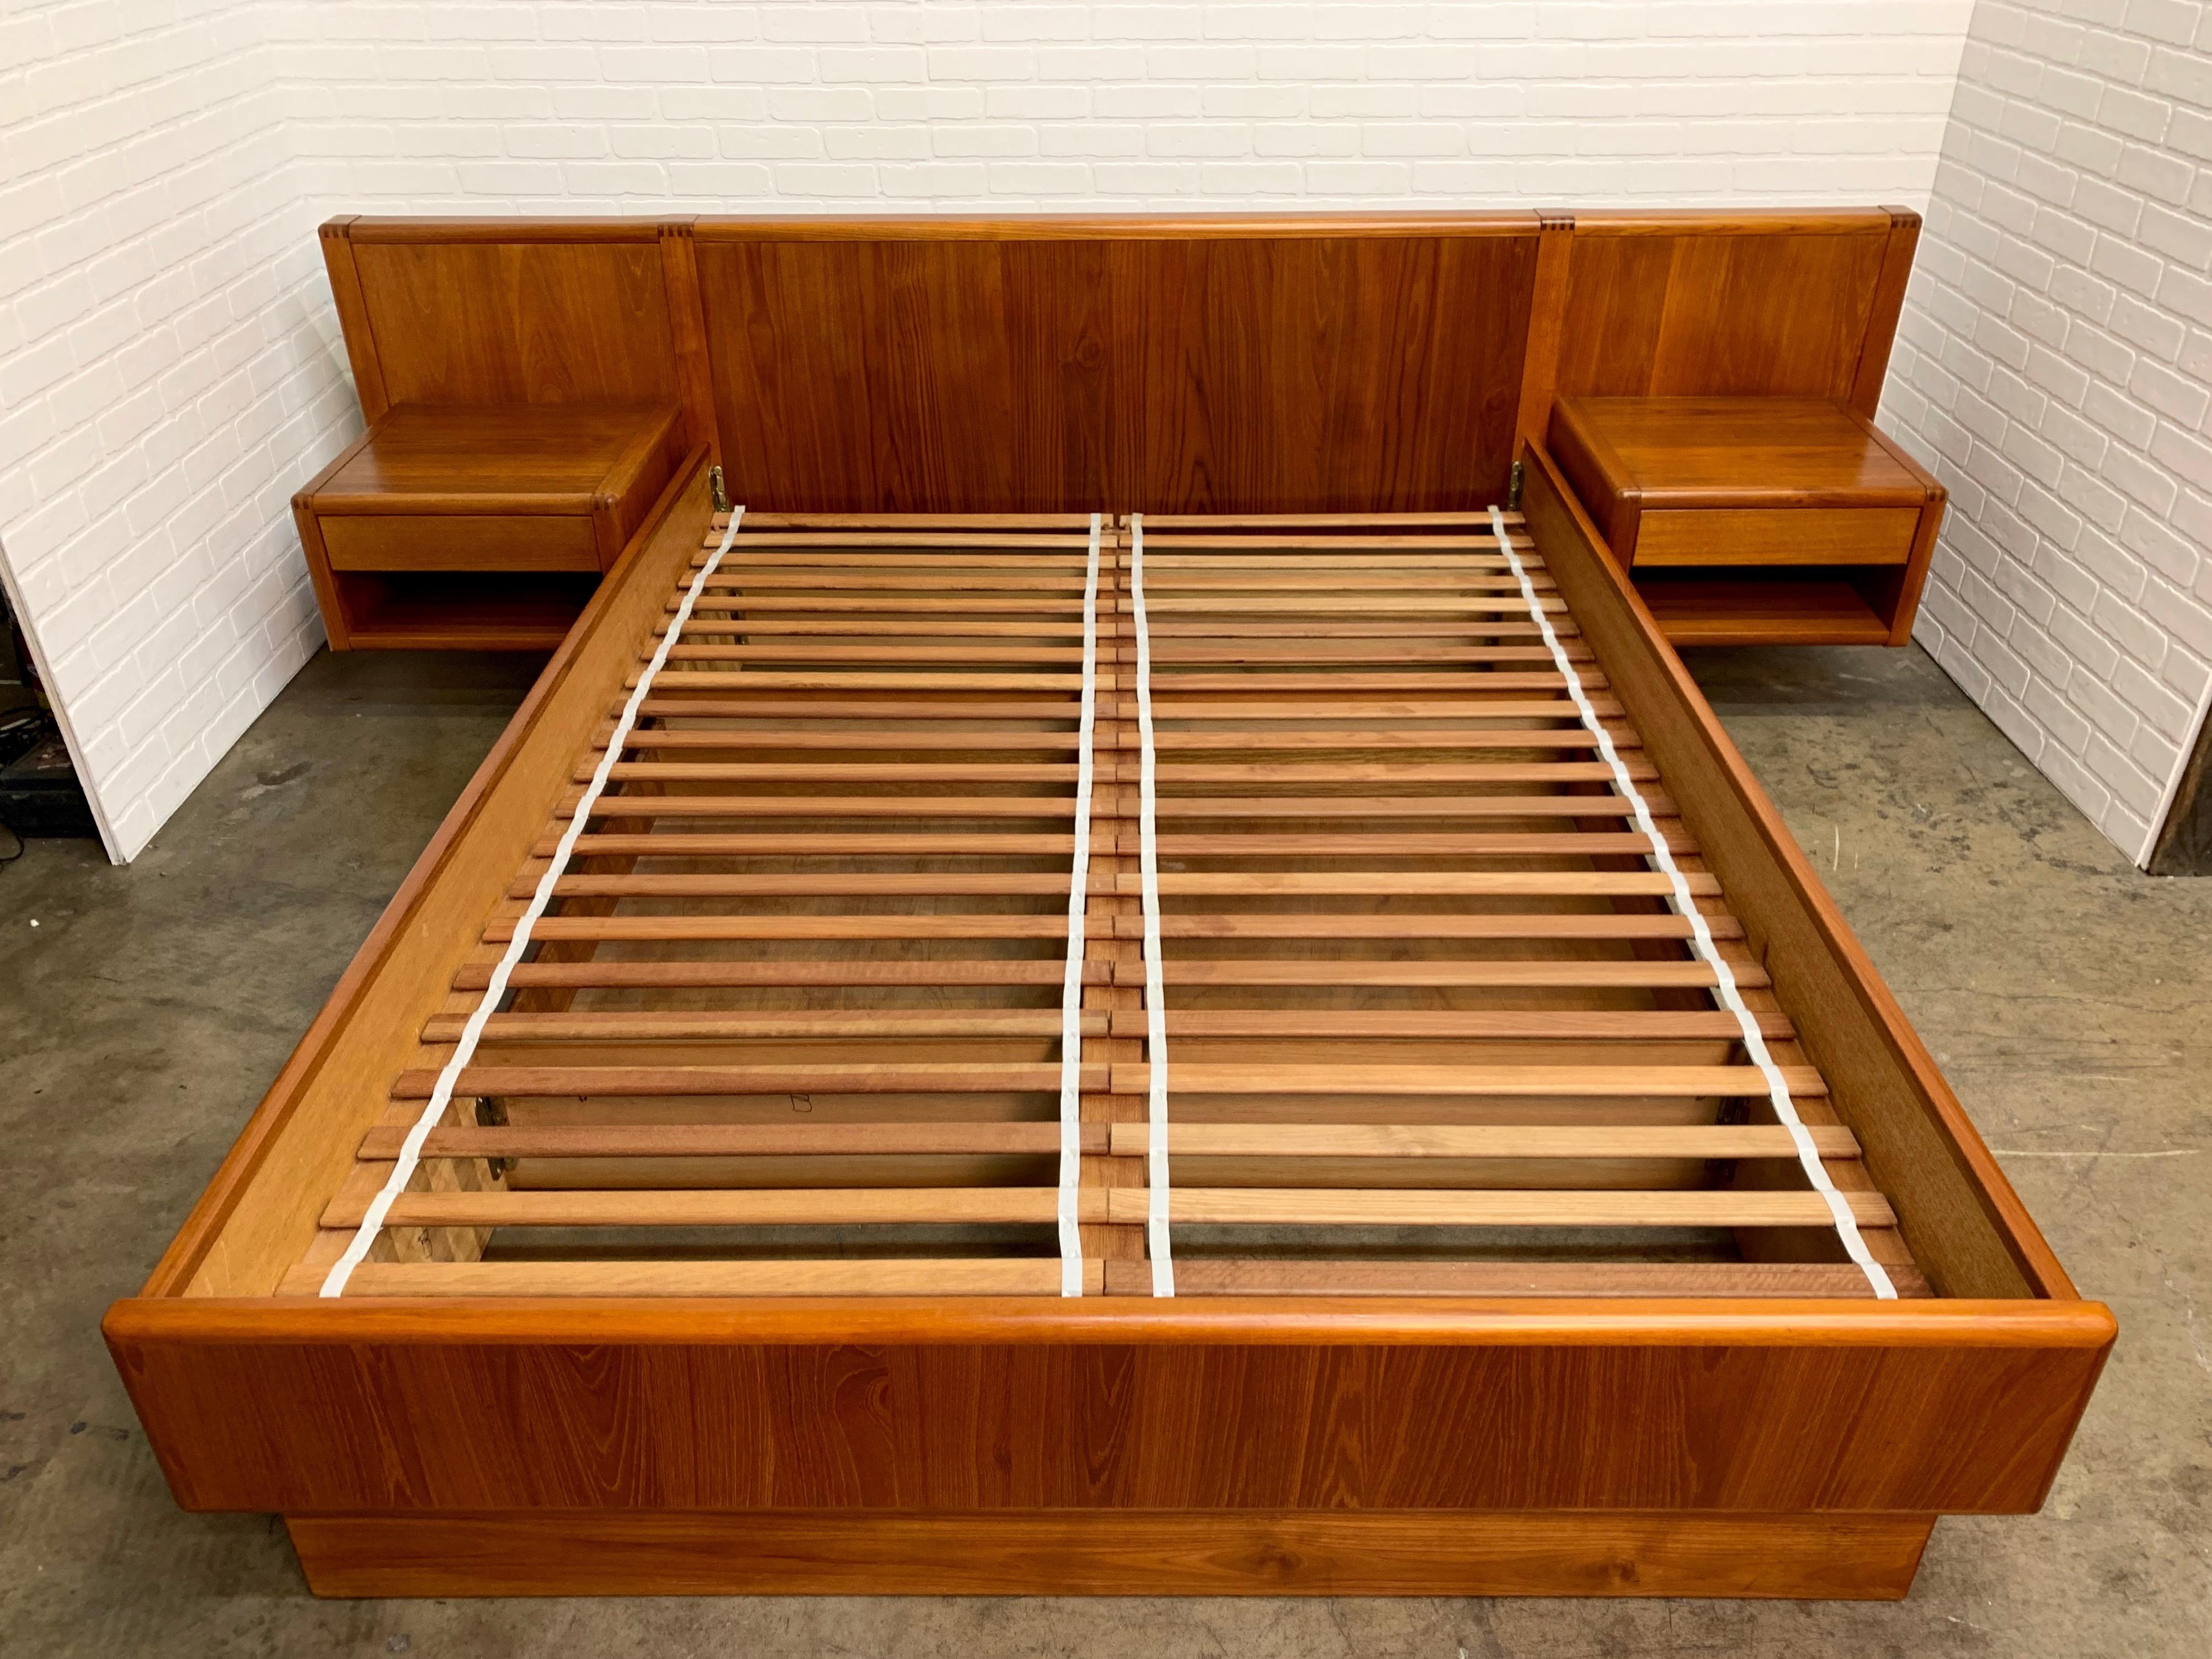 Teak platform queen size bed with floating night stands in the Danish modern style.